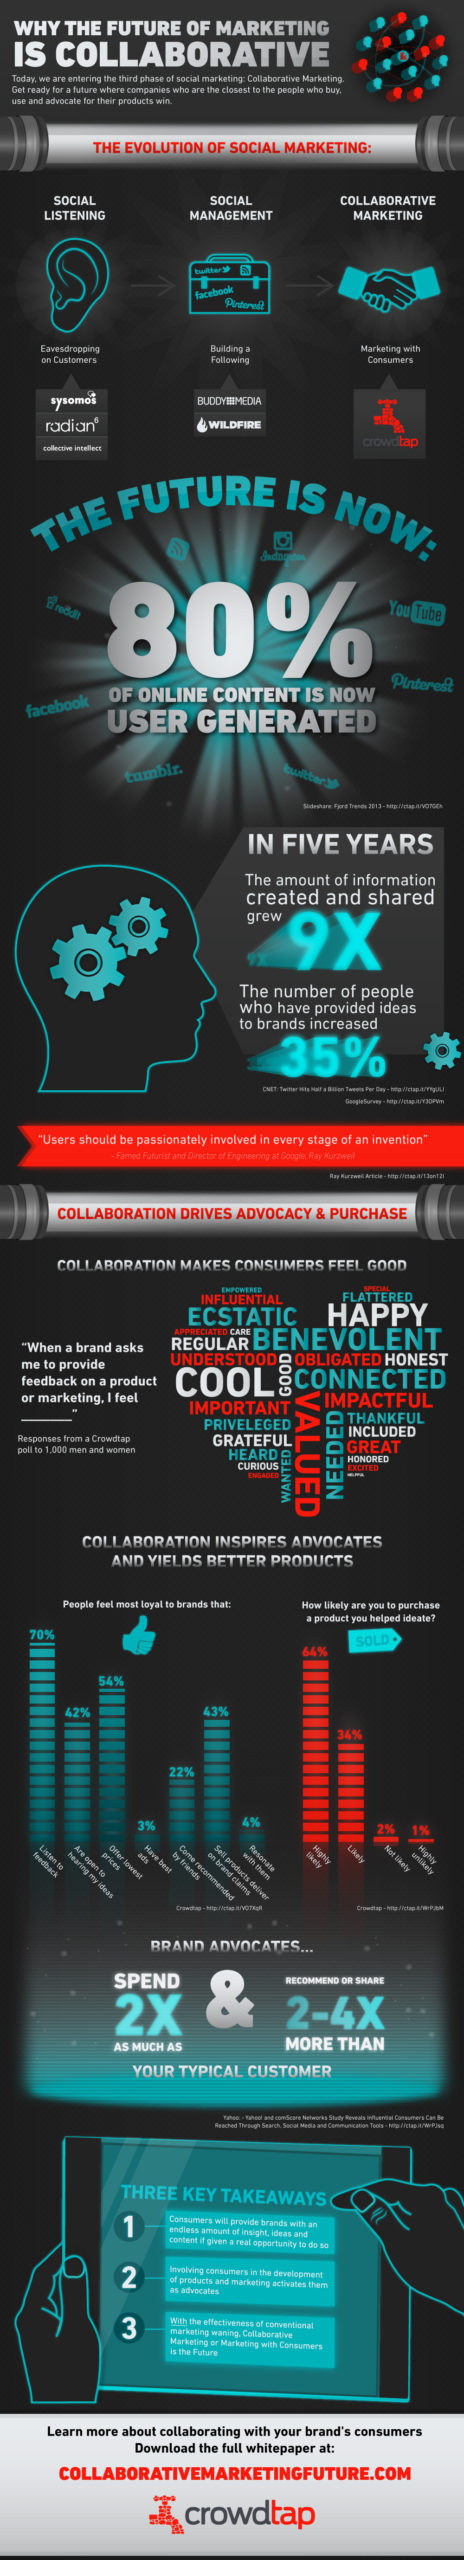 2013-04-03-The_Future_of_Marketing_Infographic_March_20131